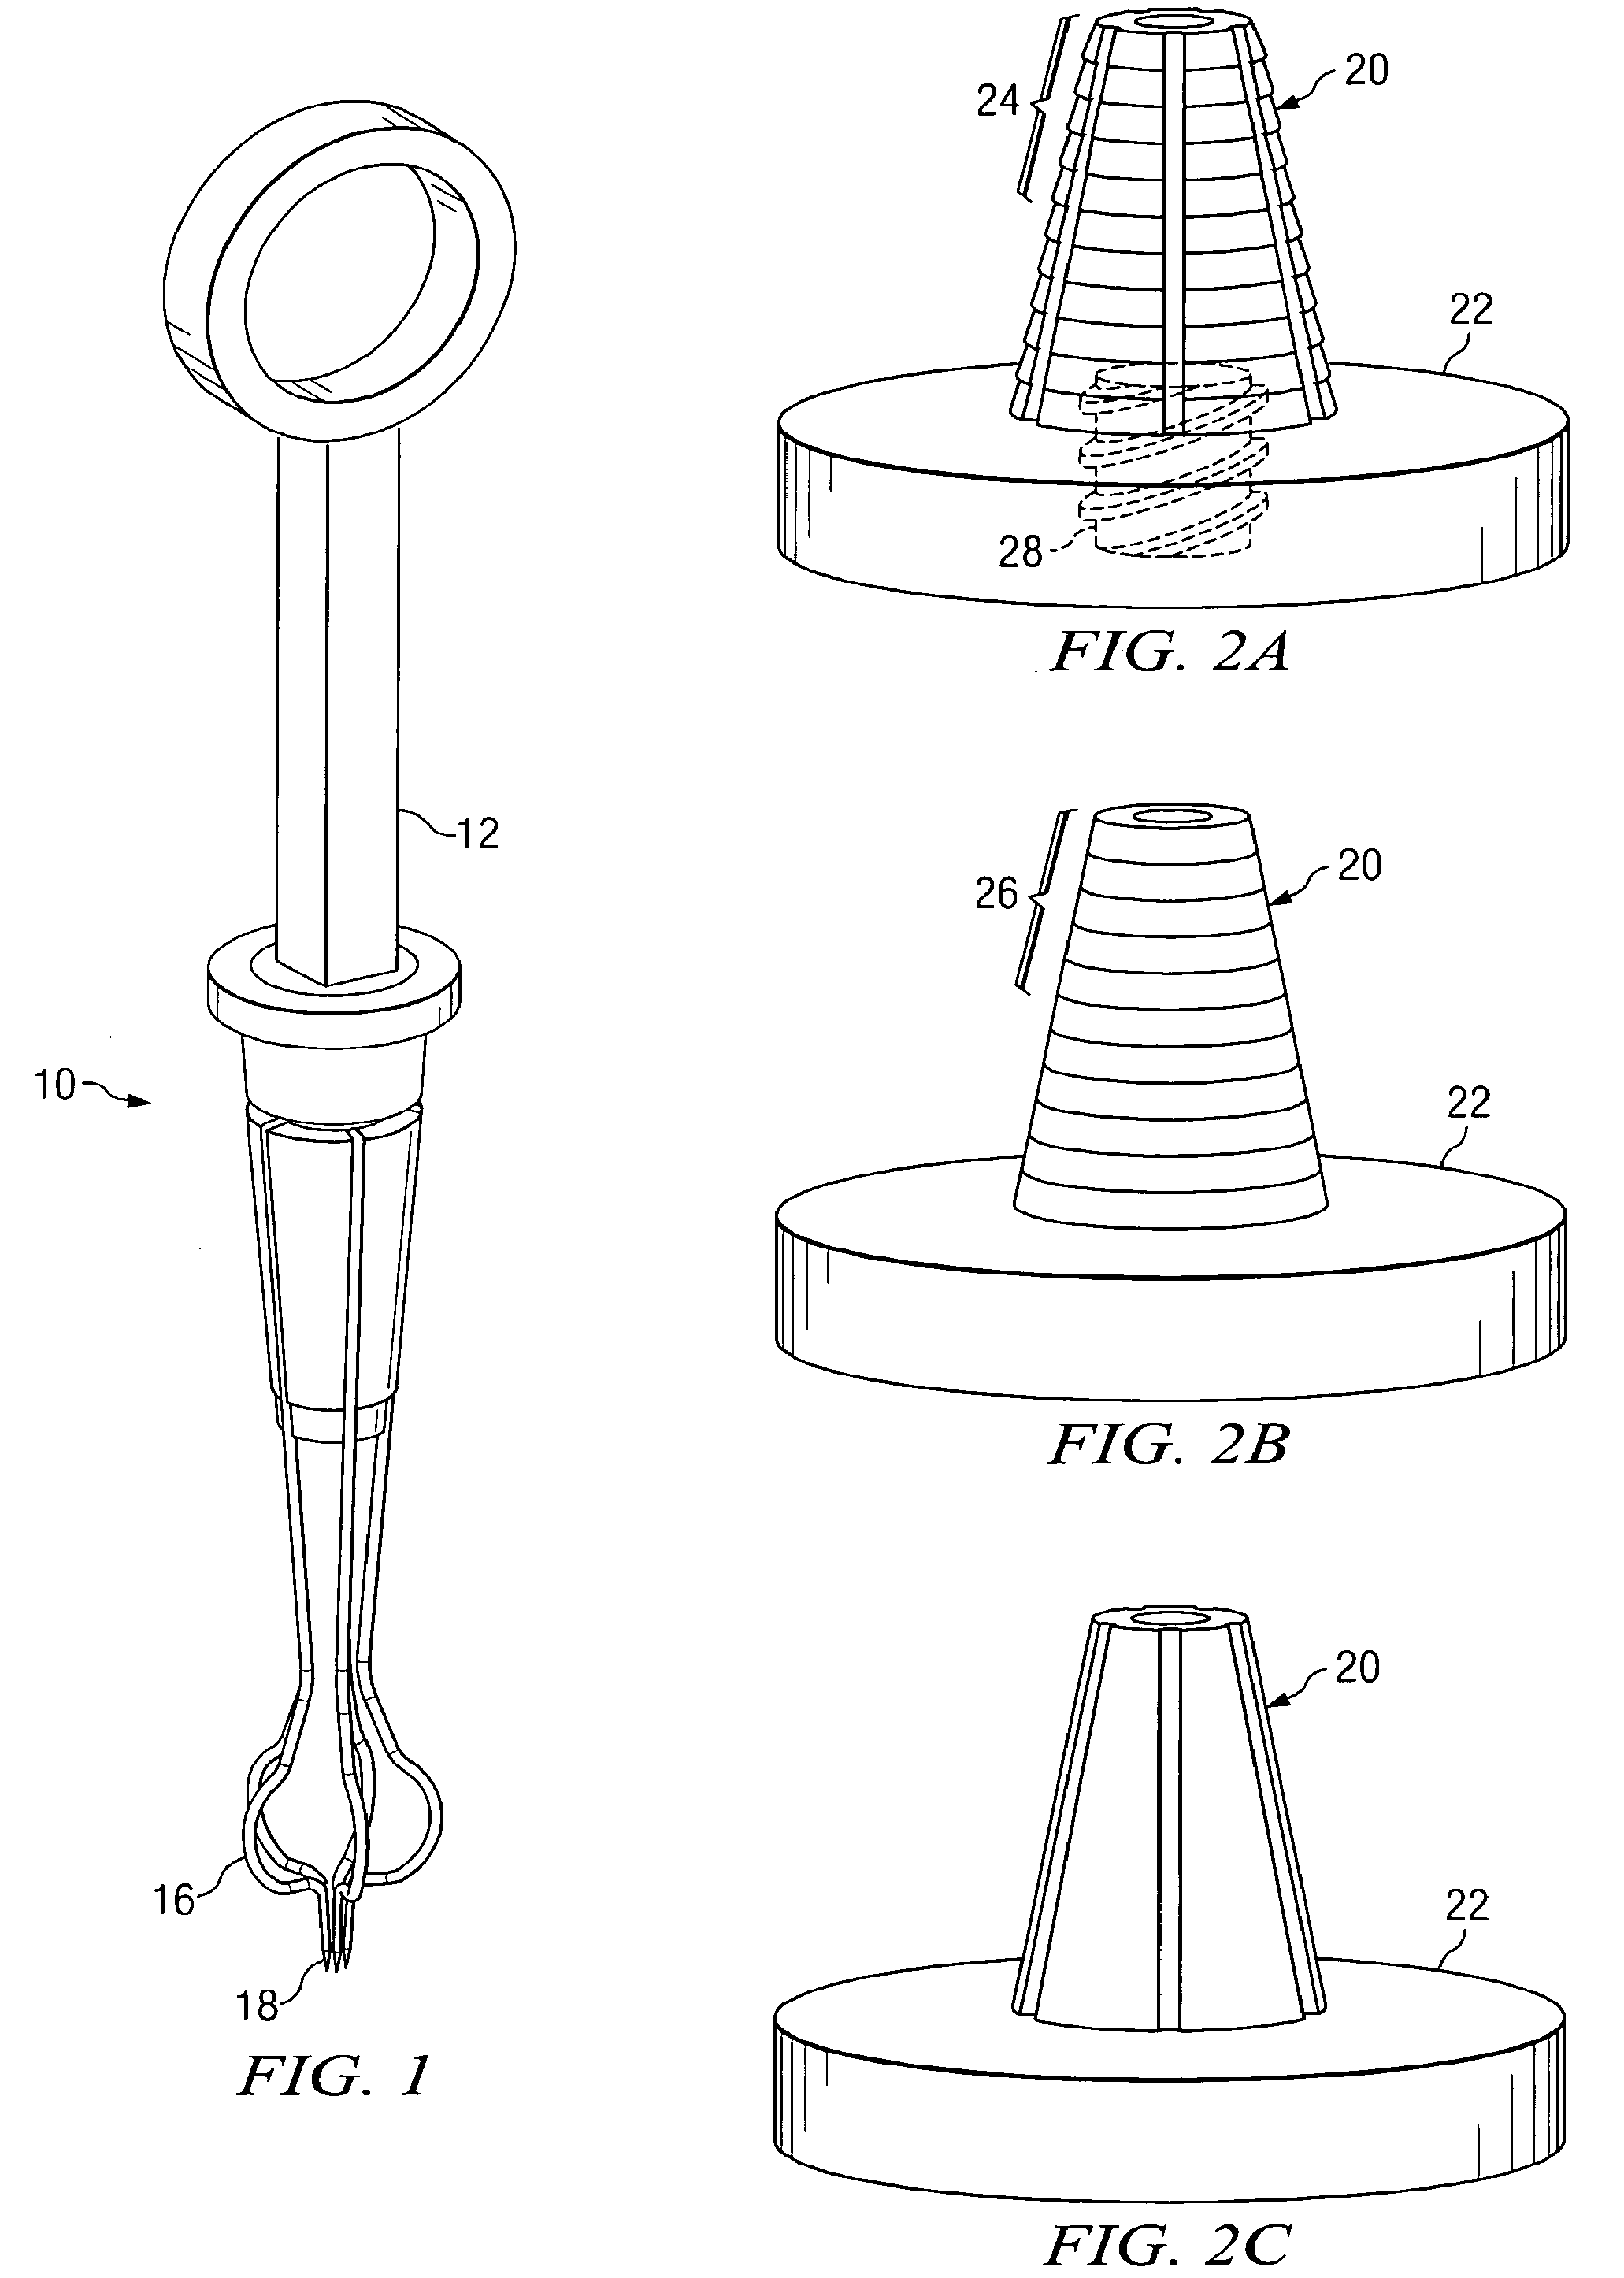 System and method for attaching a vein, an artery, or a tube in a vascular environment